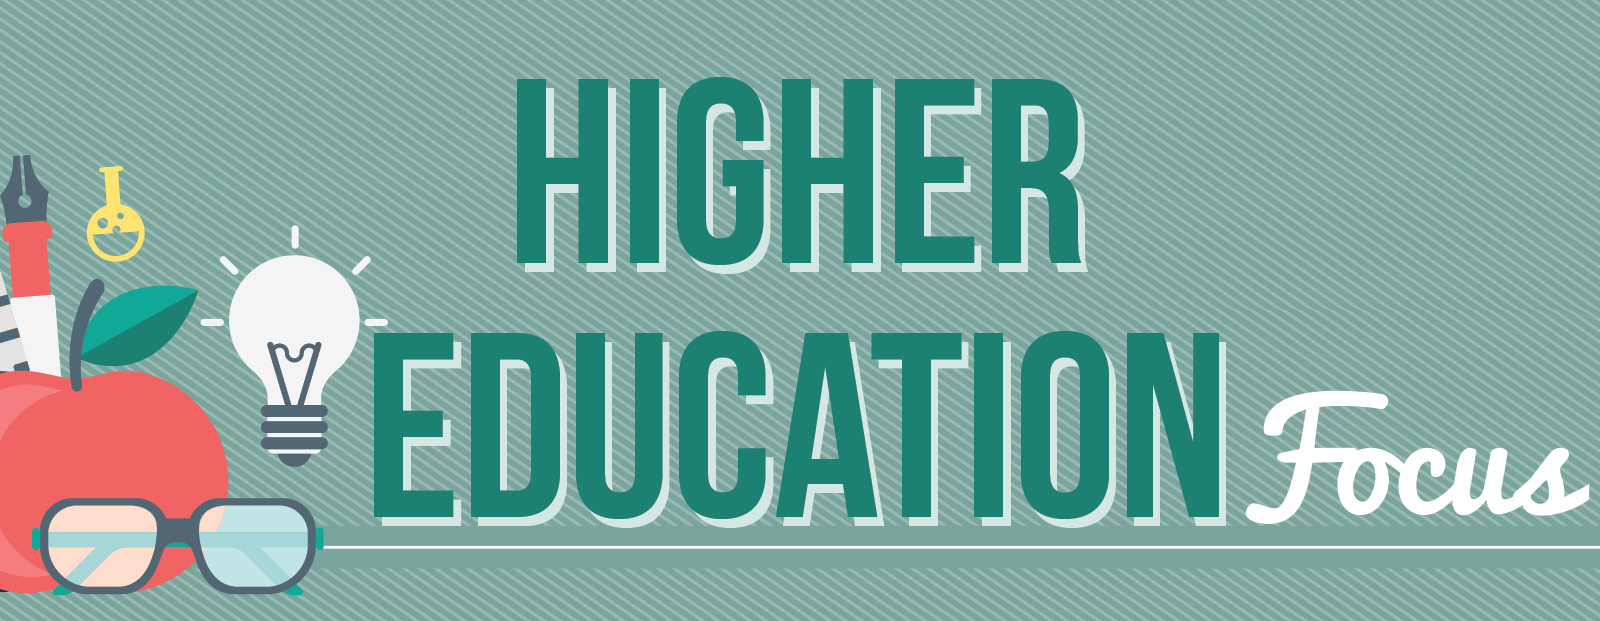 benefits of higher education